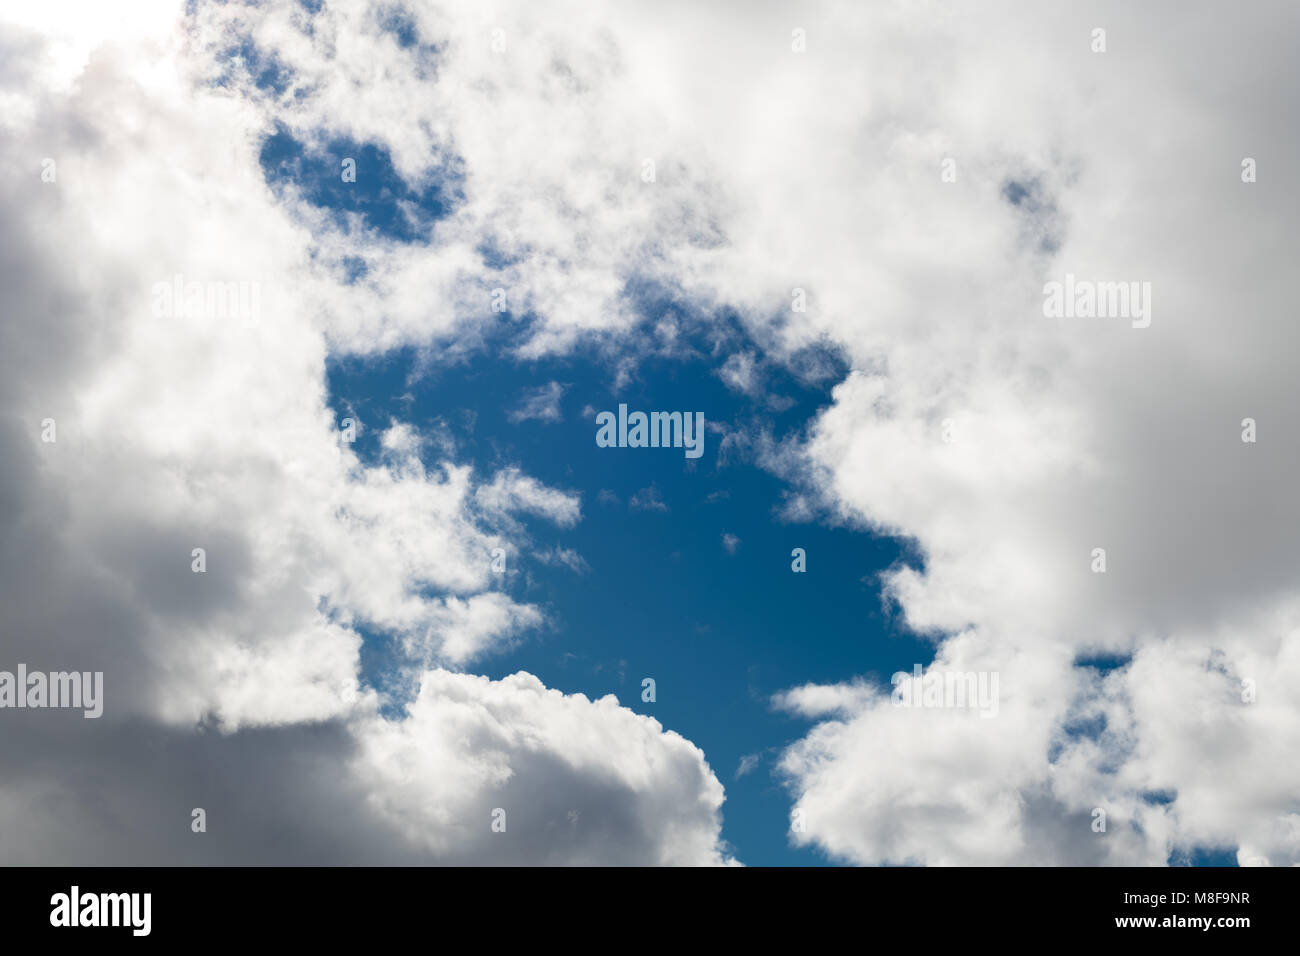 Clouds in the sky that are white with a large patch of blue in the middle Stock Photo